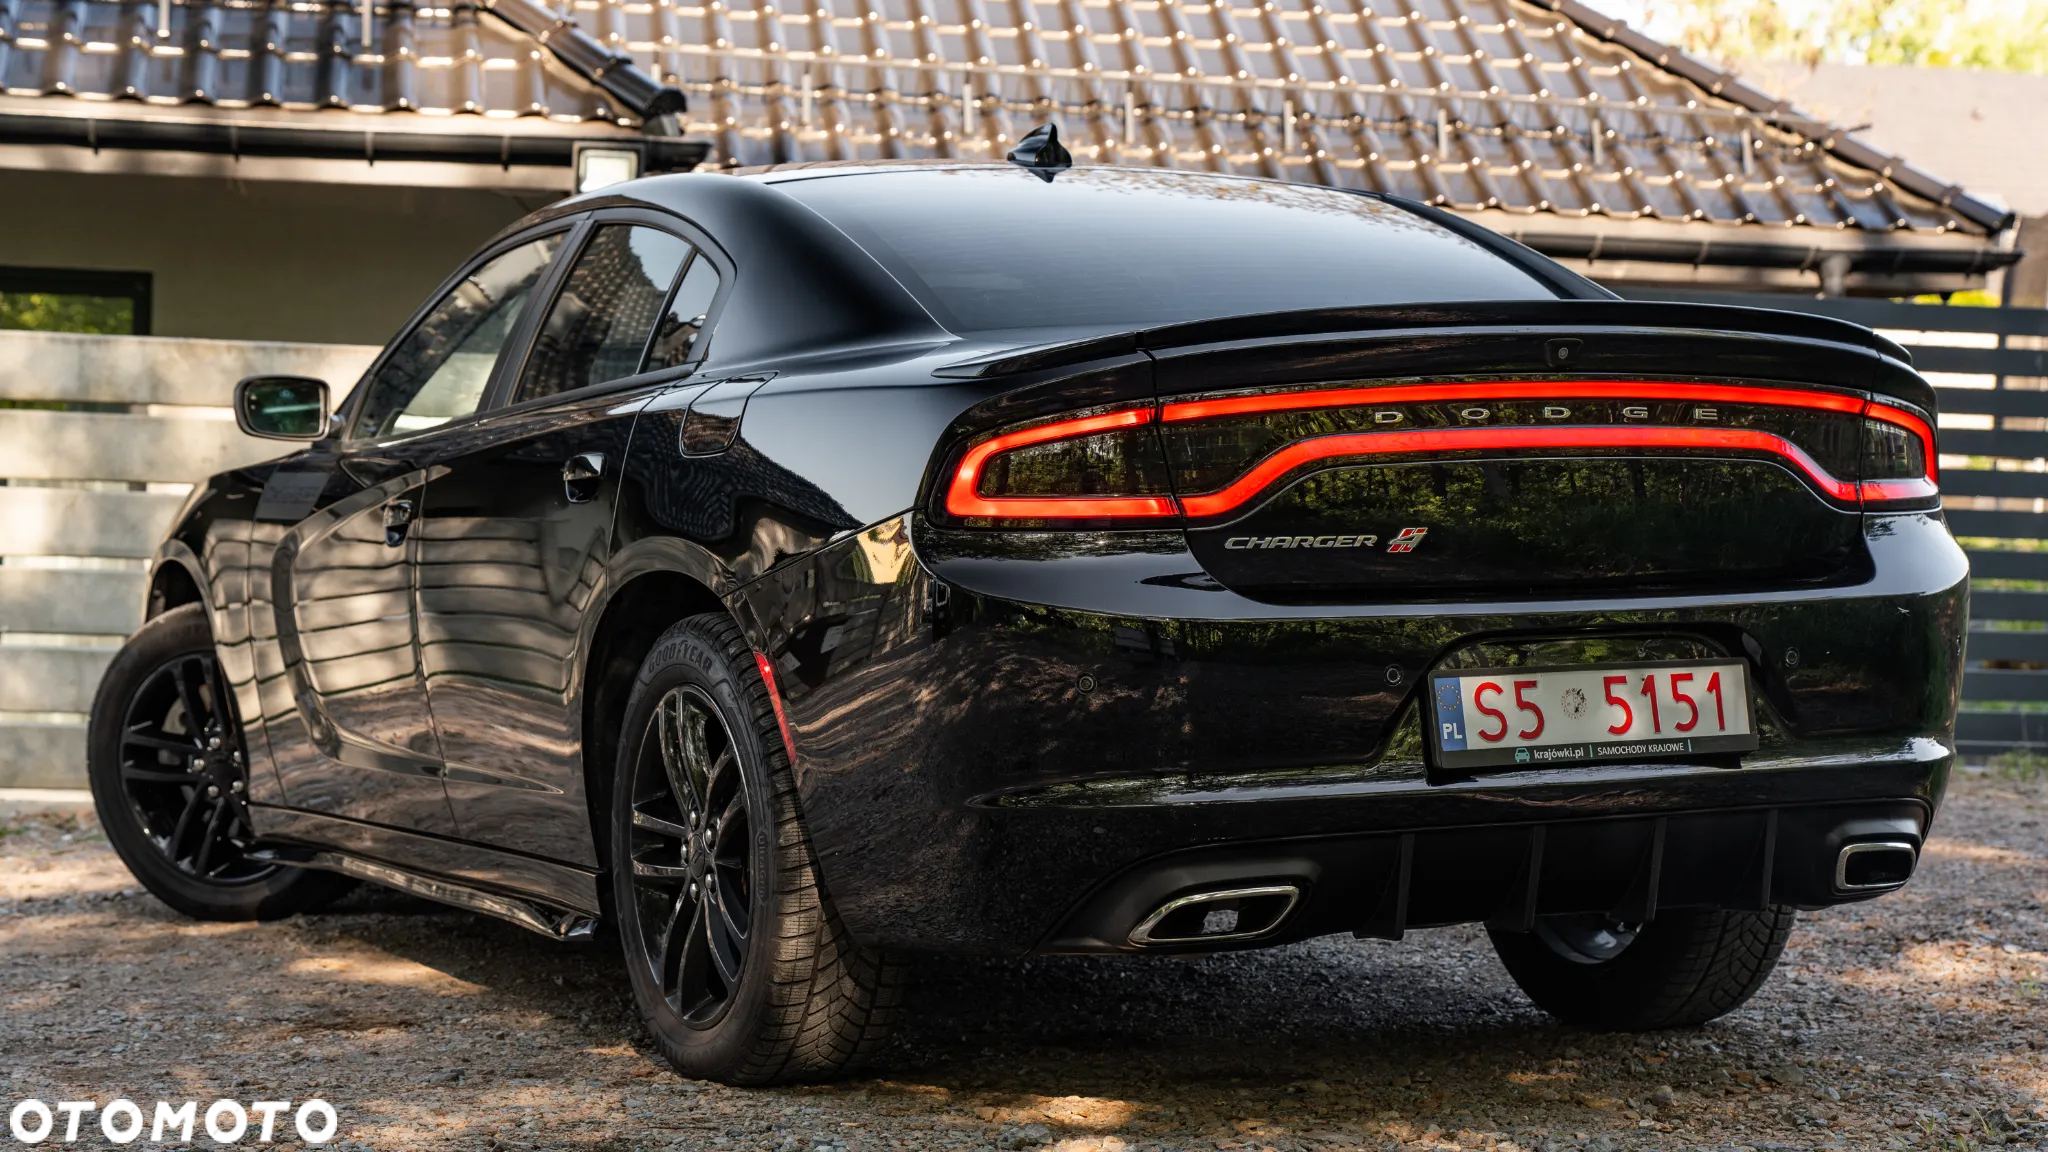 Dodge Charger 3.6 GT - 10